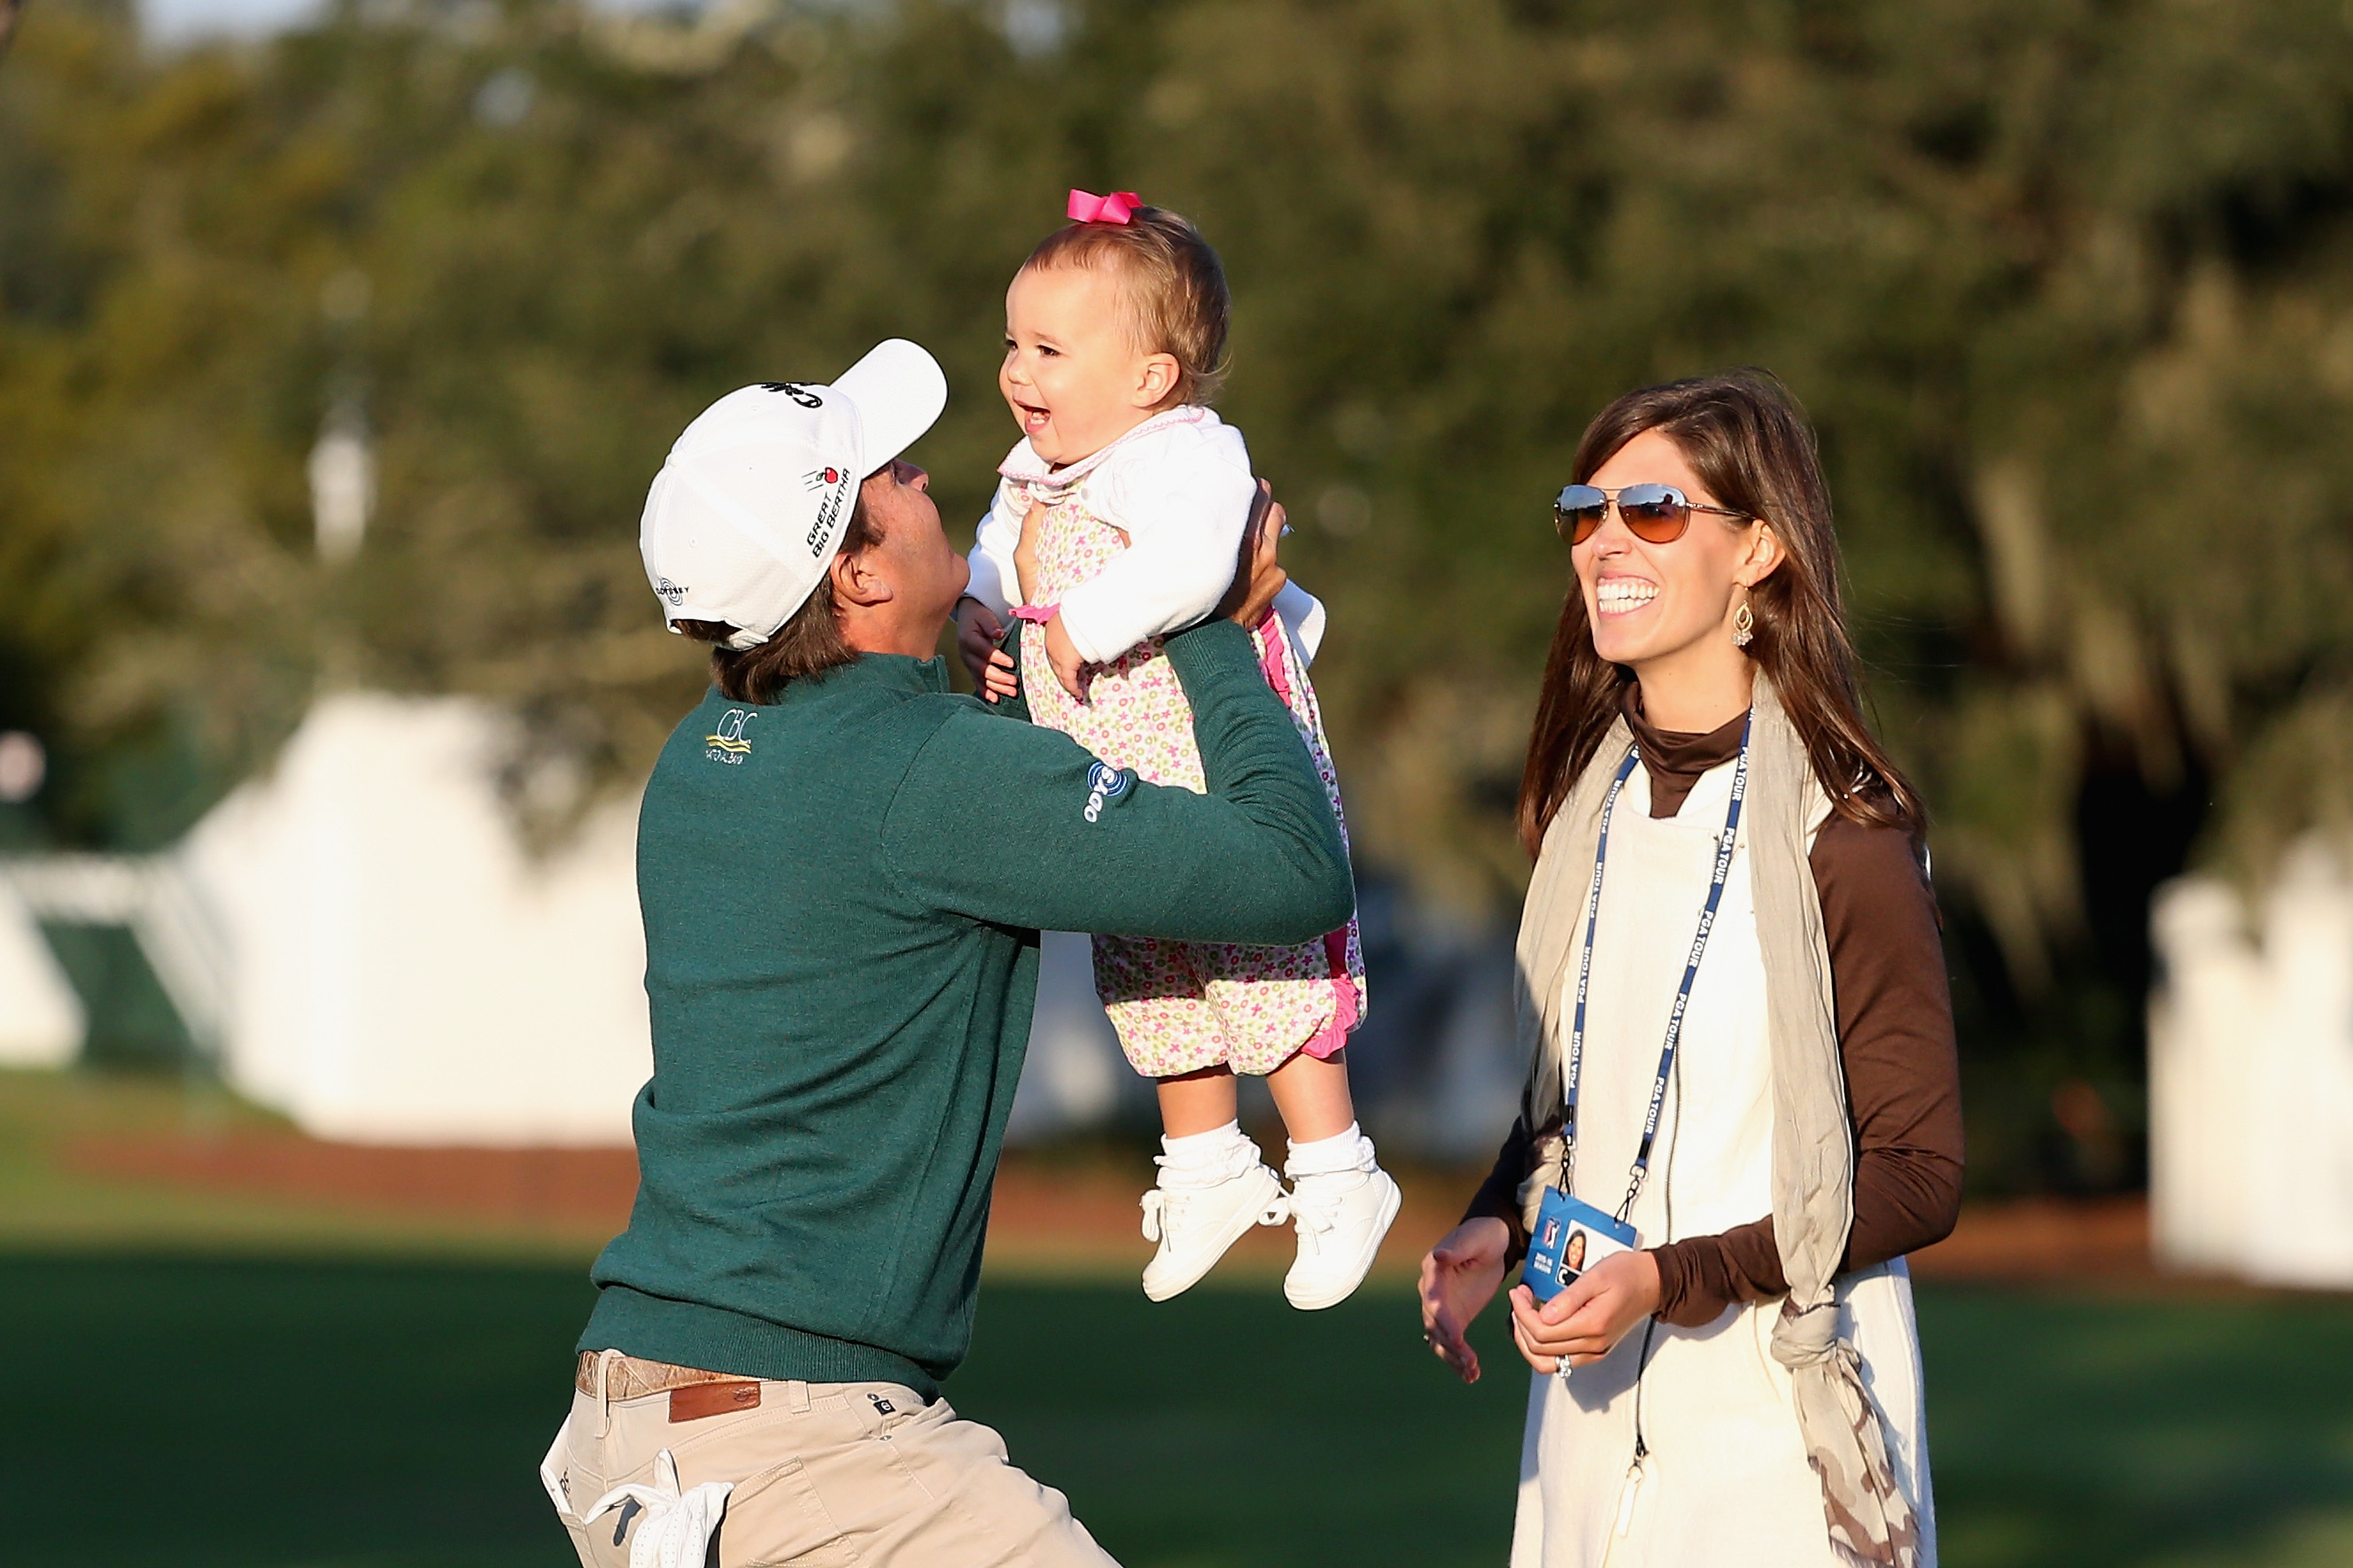 Kevin Kisner's Family 5 Fast Facts You Need to Know